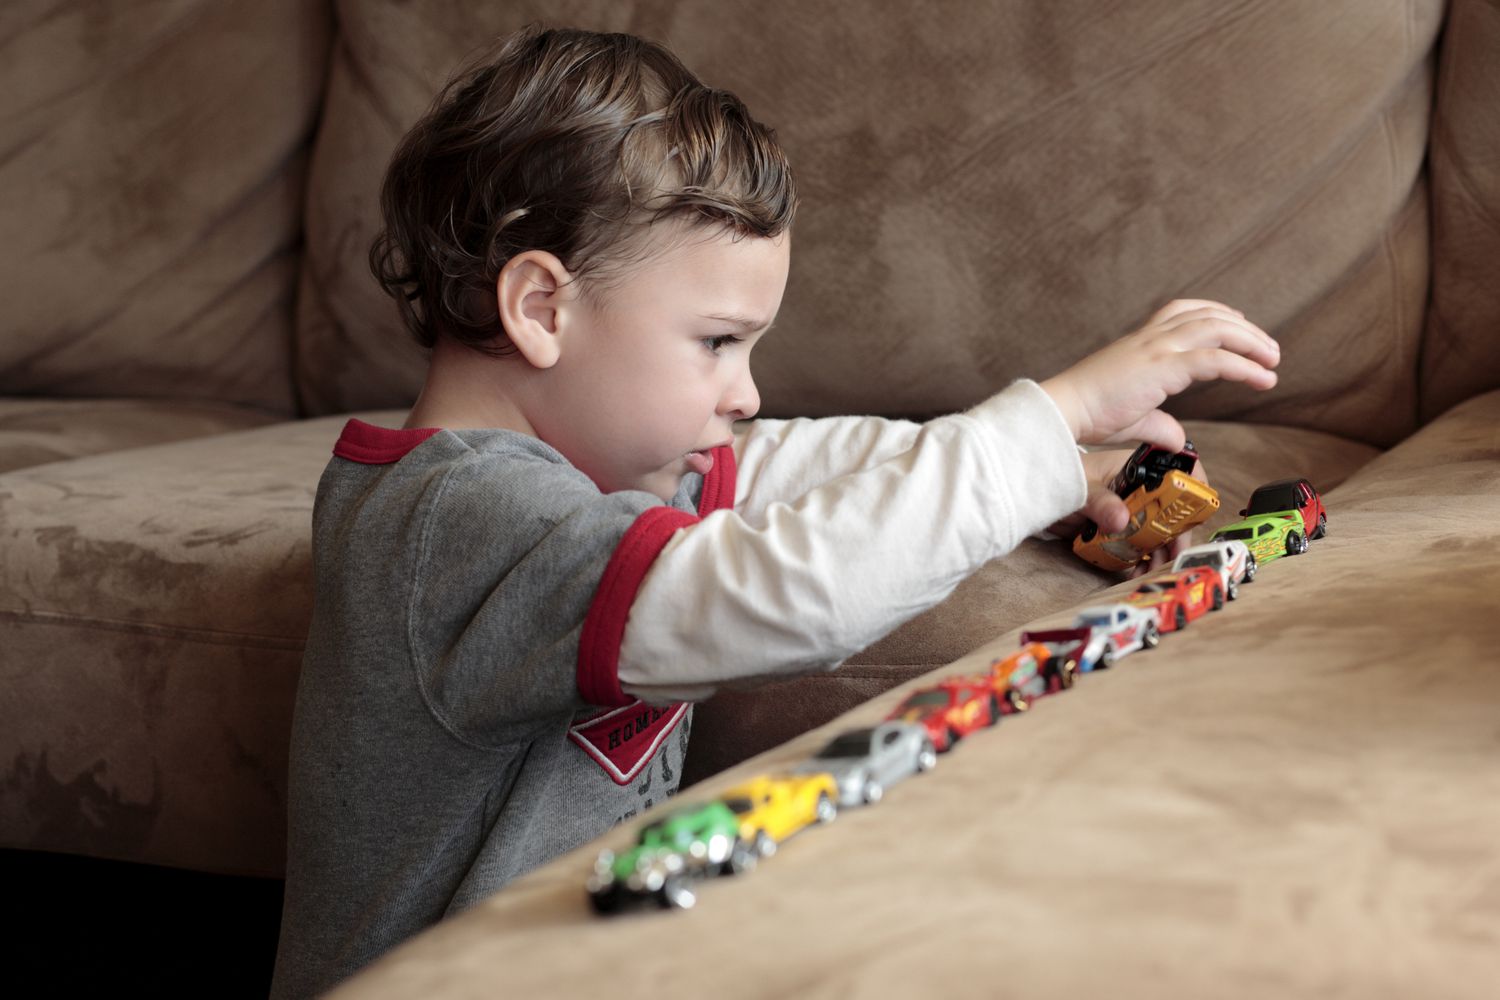 Autistic 4-year-old shows improvements after receiving support. (Photo: Verywell Health)